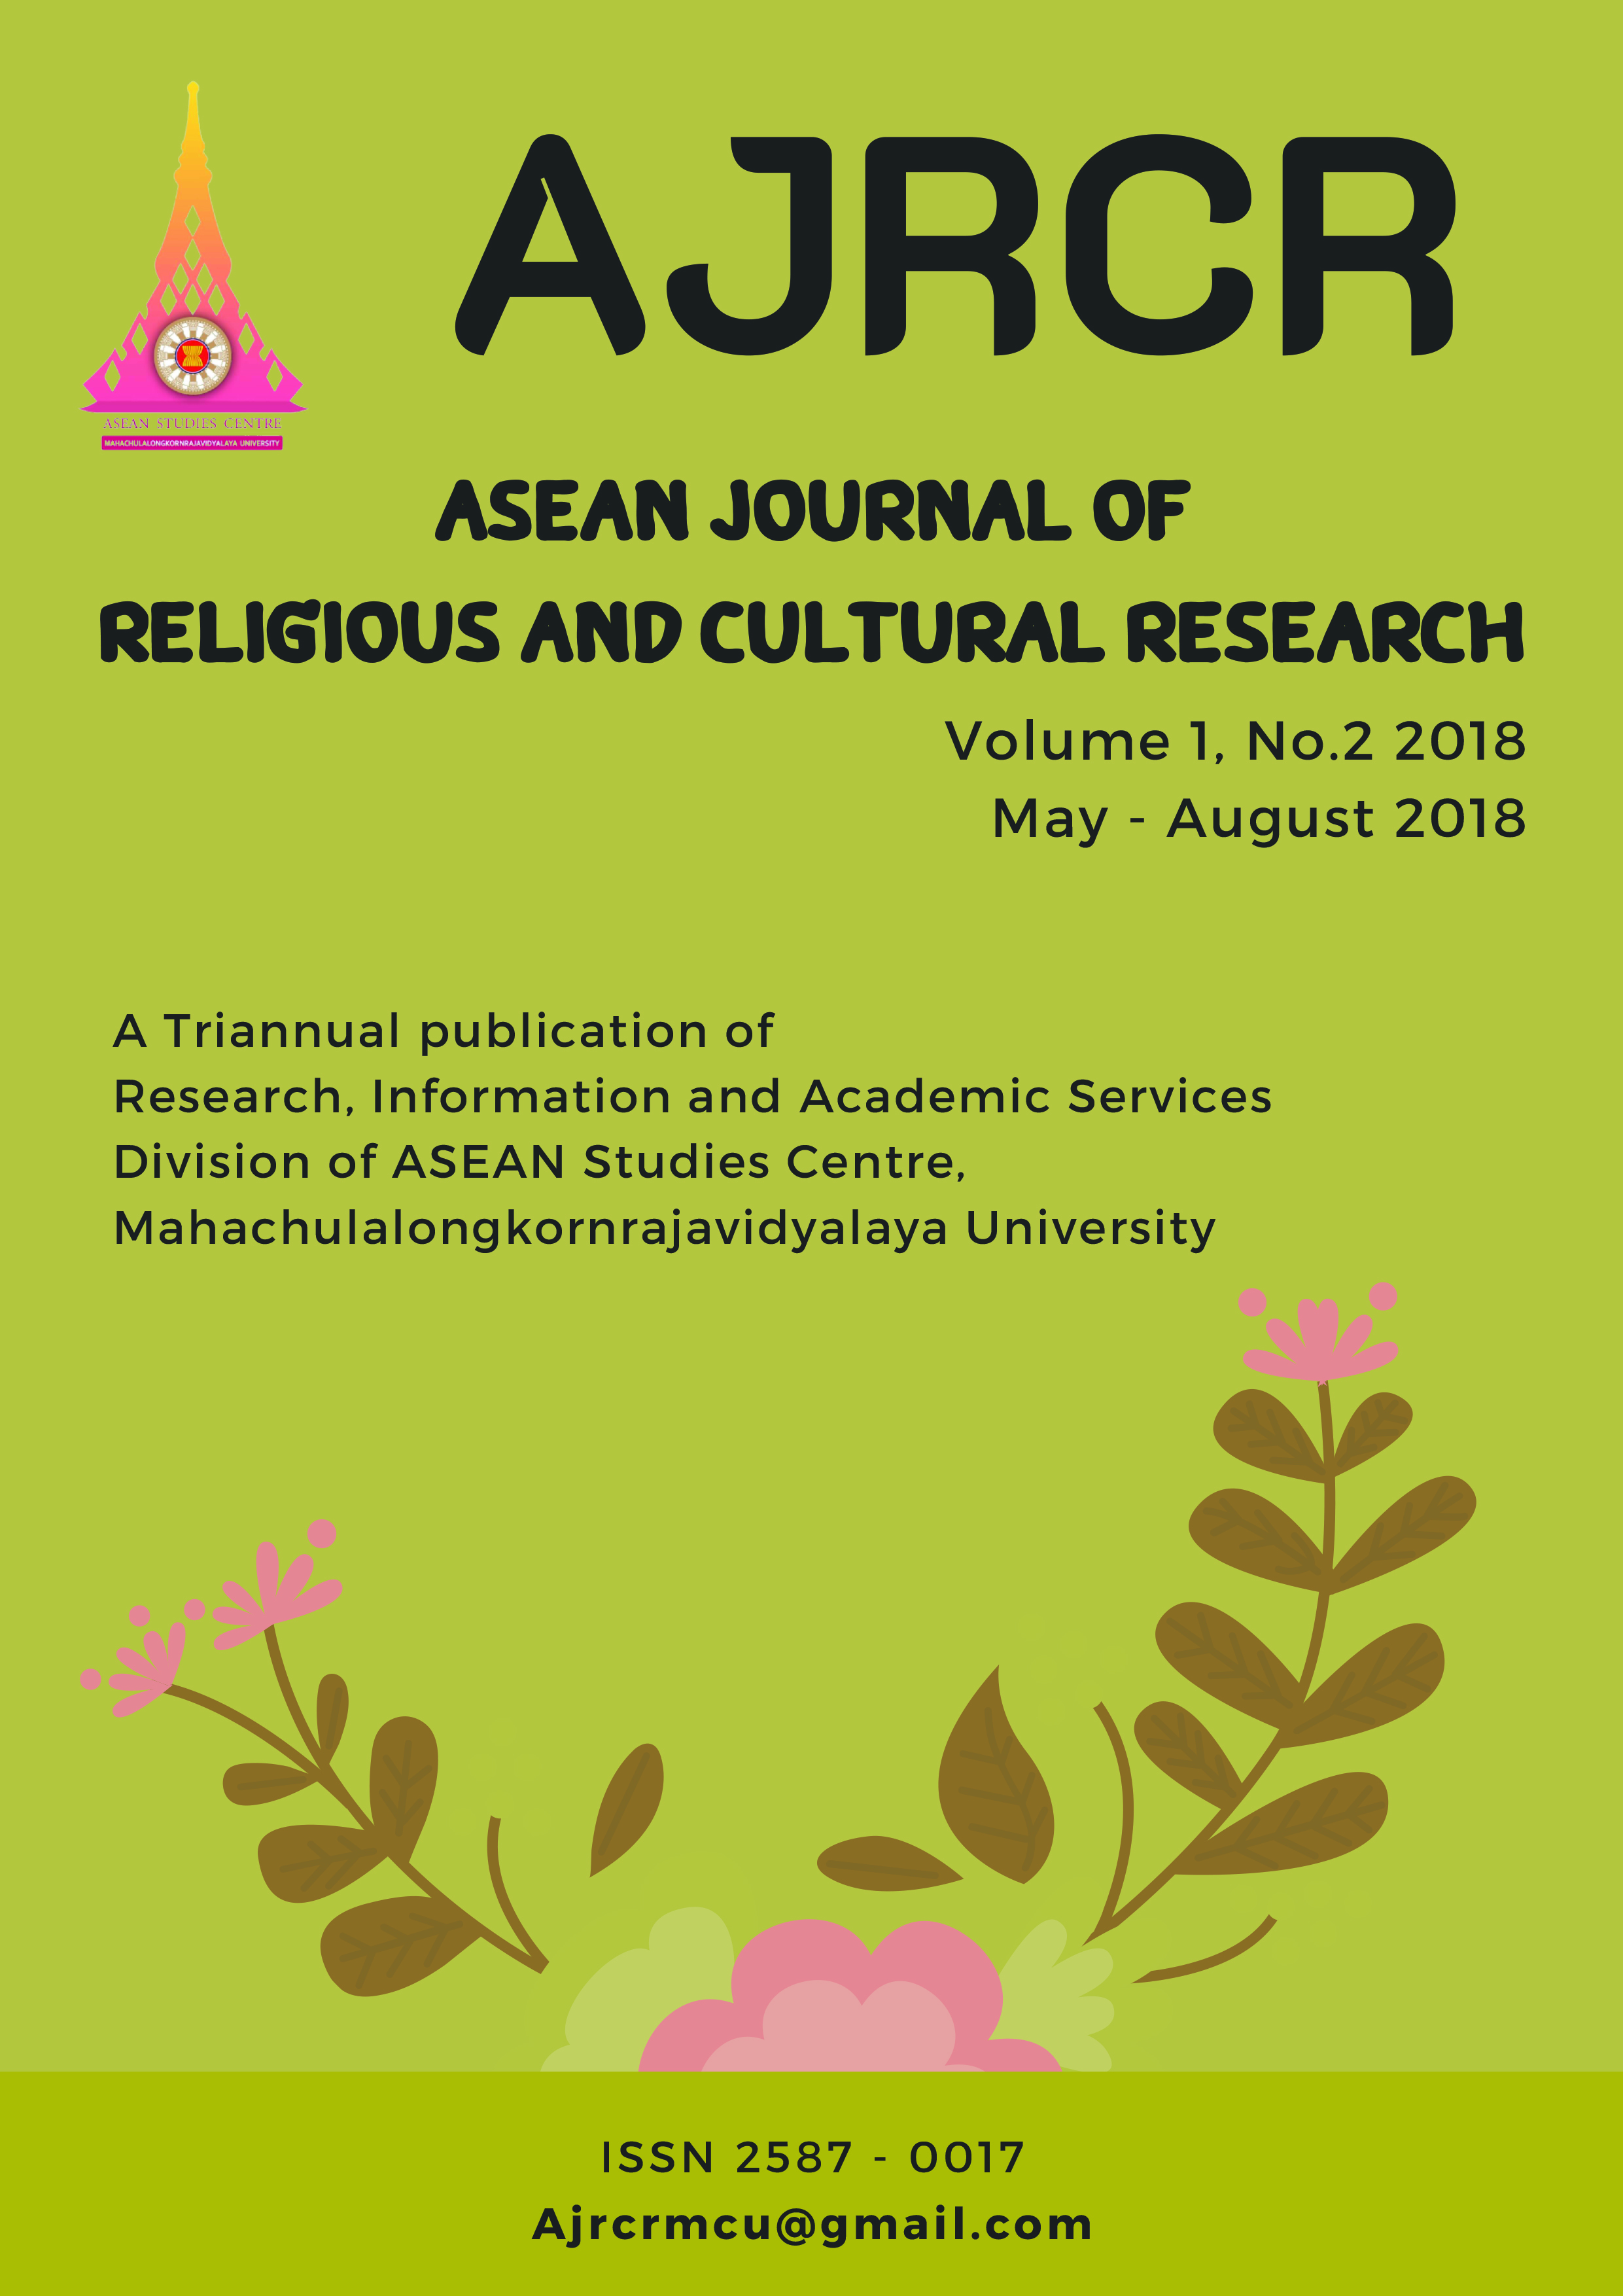 					View Vol. 1 No. 2 (2018): ASEAN Journal of Religious and Cultural Research (AJRCR)
				